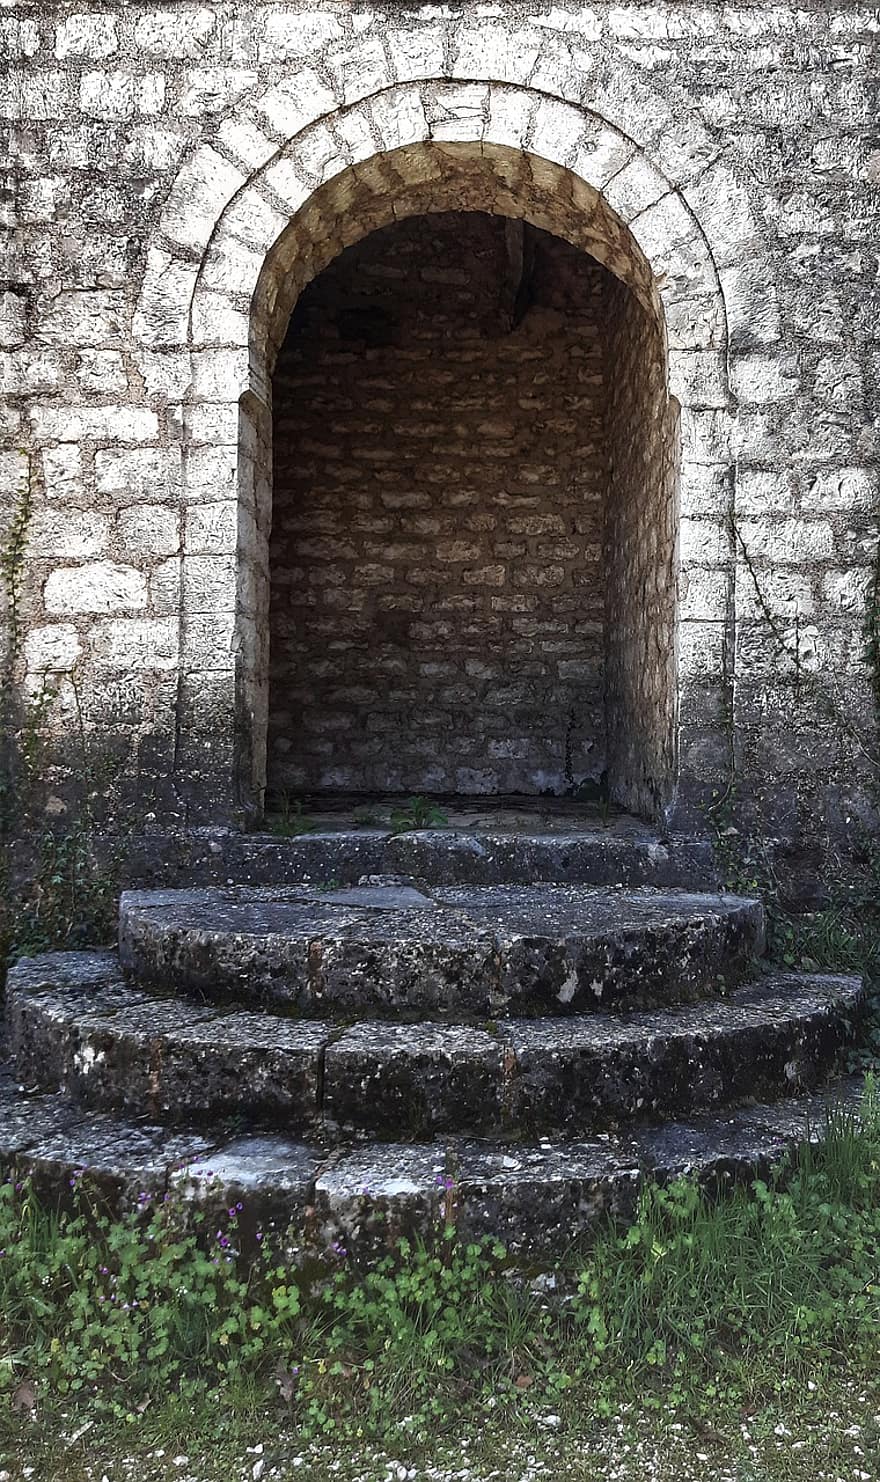 Arch, Gate, Portal, Archway, Castle, Architecture, Old, Stone, Doorway, Historically, Fort